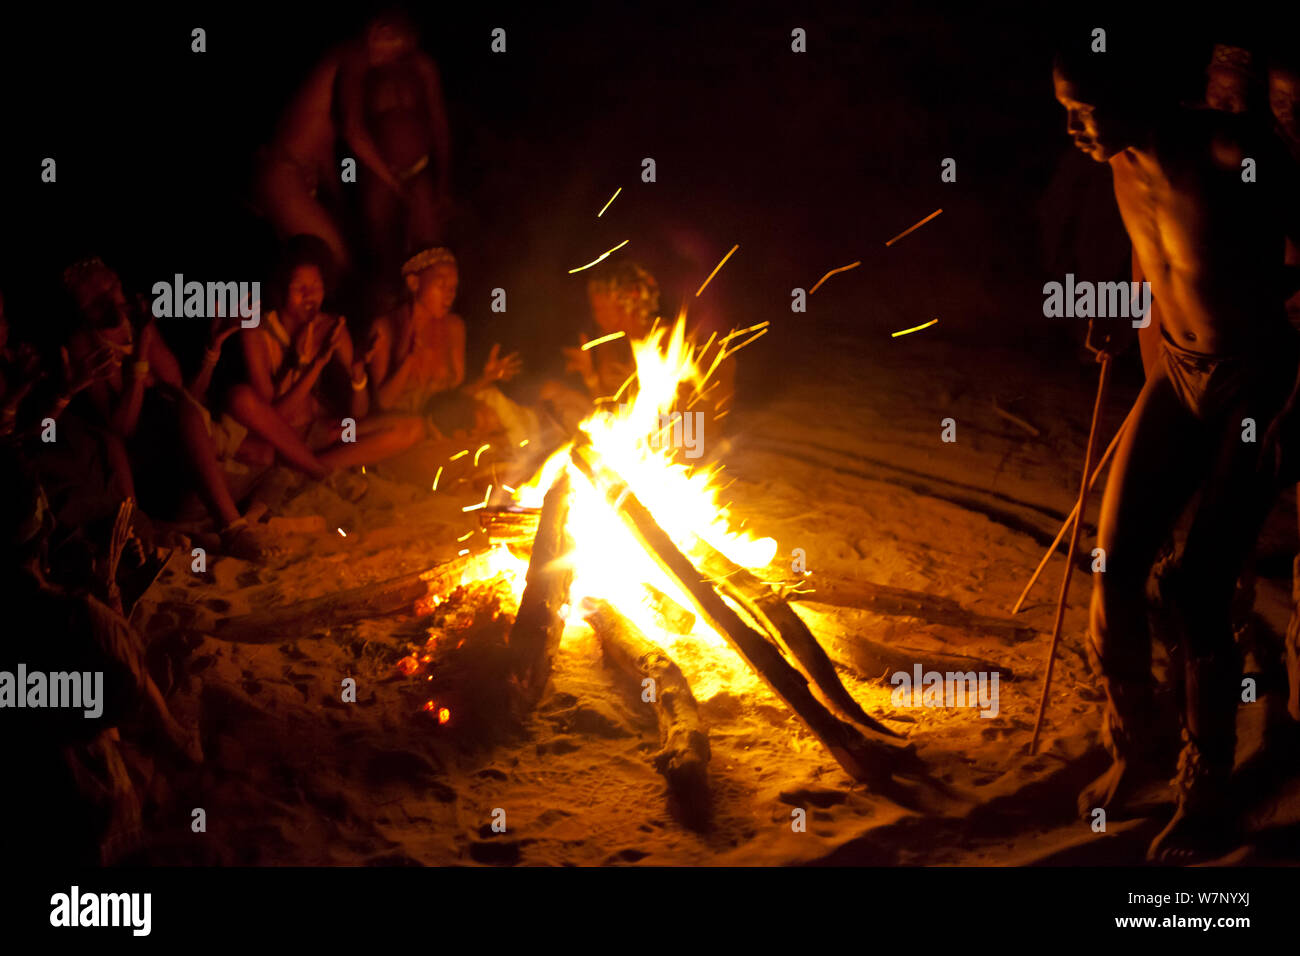 Zu/'hoasi Bushmen carry out a traditional Trance Dance. Women clap and sing by a fire while men dance in a circle in preparation for a Sangoma (Zulu healer) to perform traditional healing while in an altered state of consciousness. Kalahari, Botswana. April 2012. Stock Photo